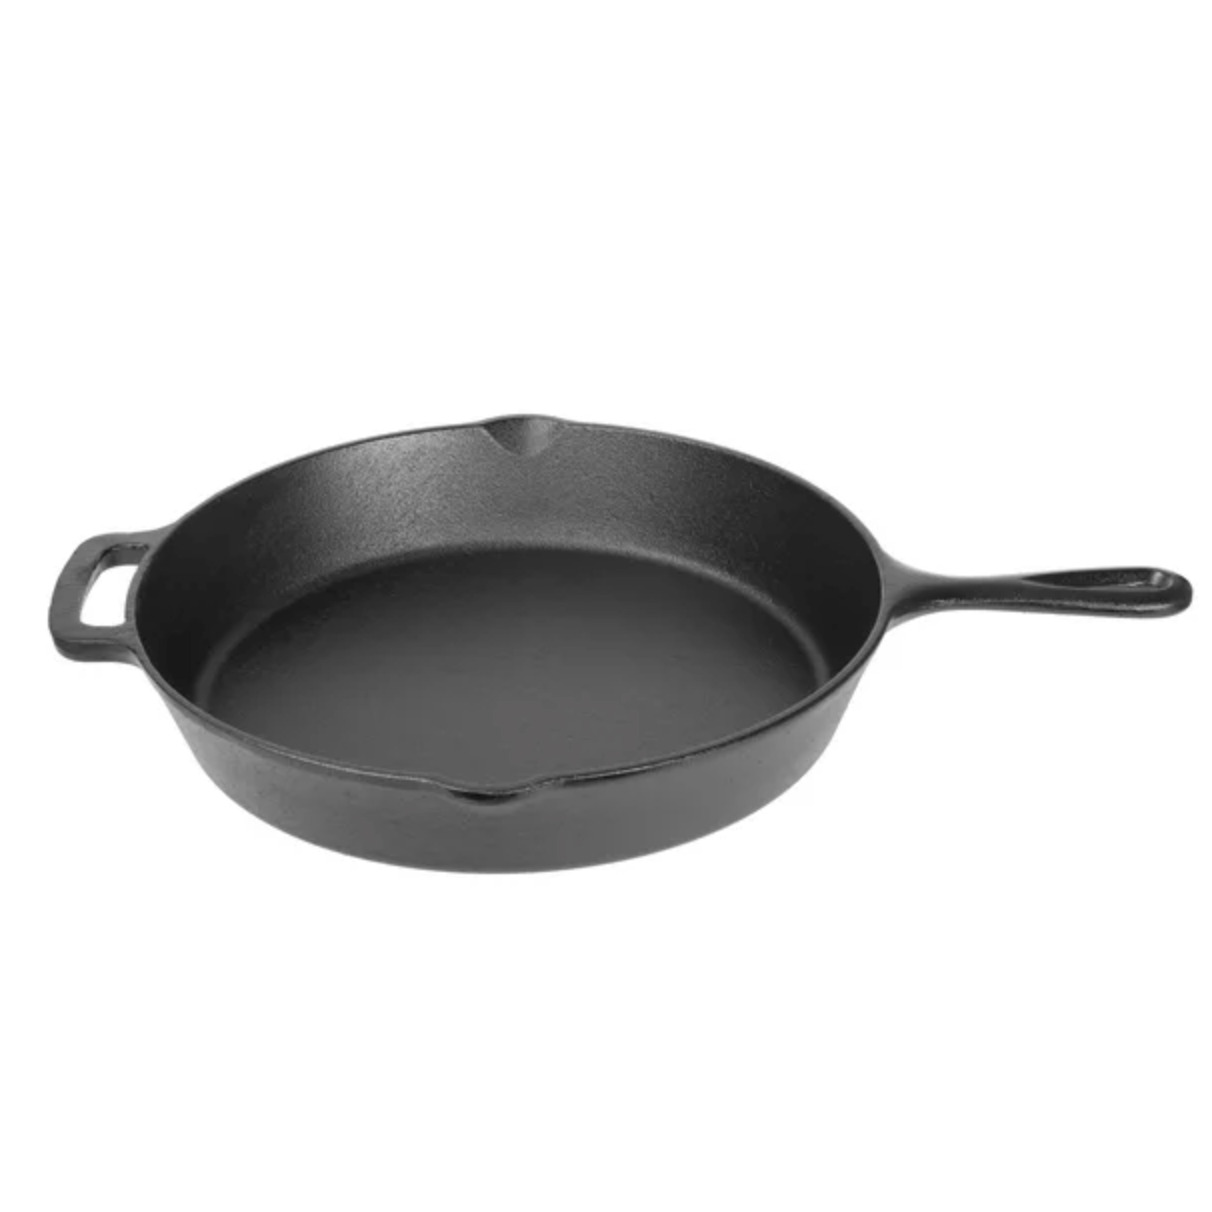 12 Inch Cast Iron Skillet Pre-Seasoned Cookware Frying Oven Skillet With Handle 